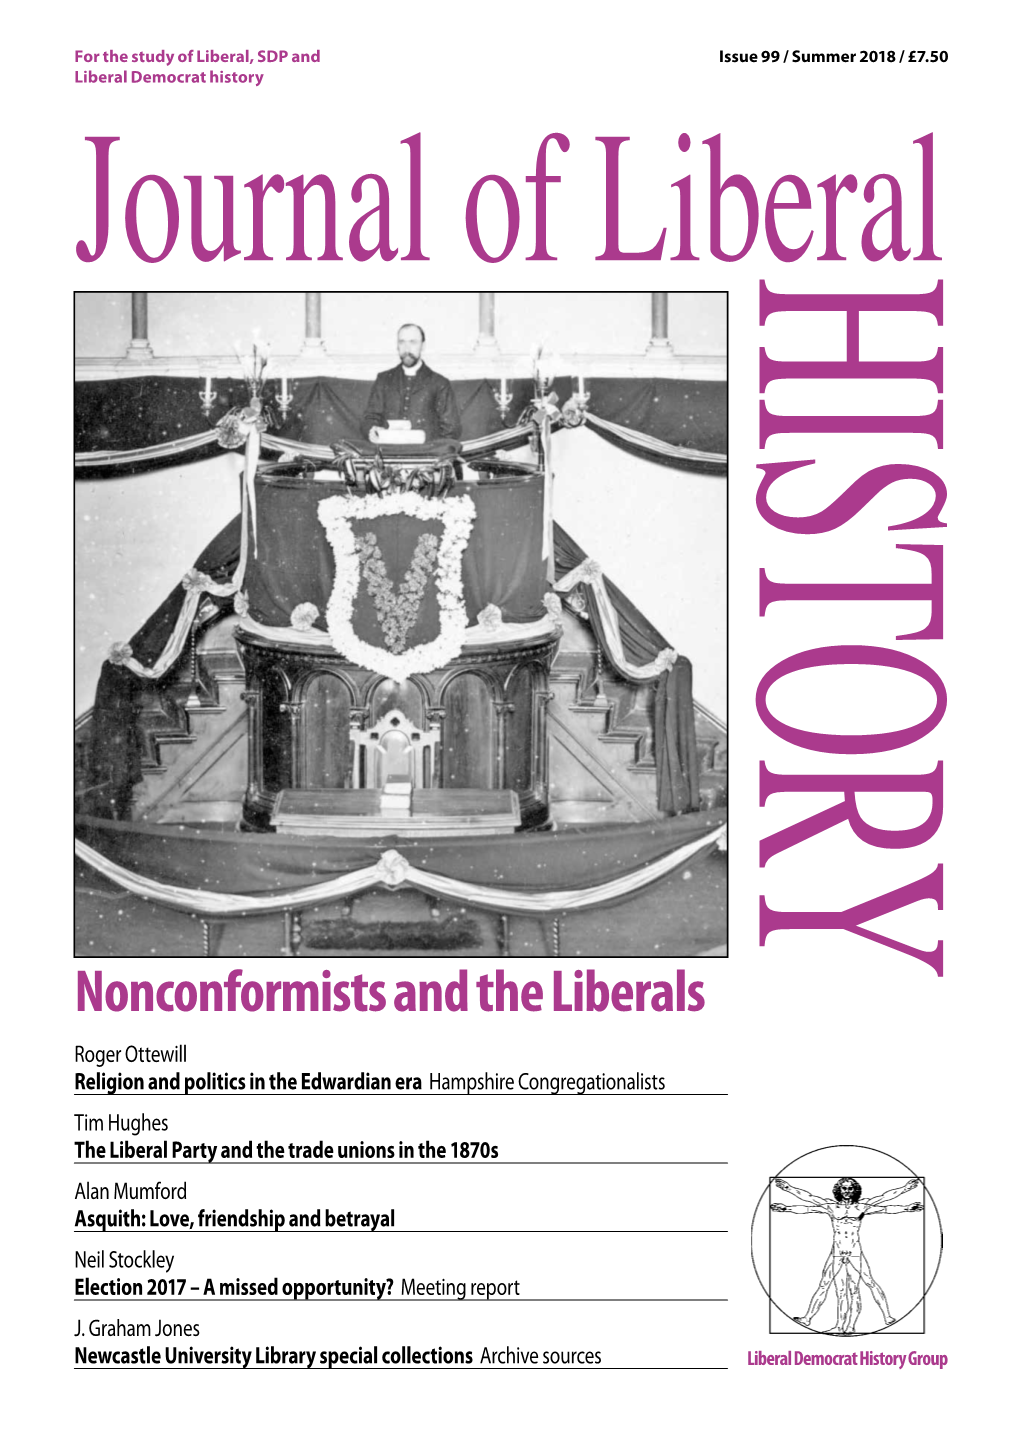 99 Summer 2018 Journal of Liberal History Issue 99: Summer 2018 the Journal of Liberal History Is Published Quarterly by the Liberal Democrat History Group